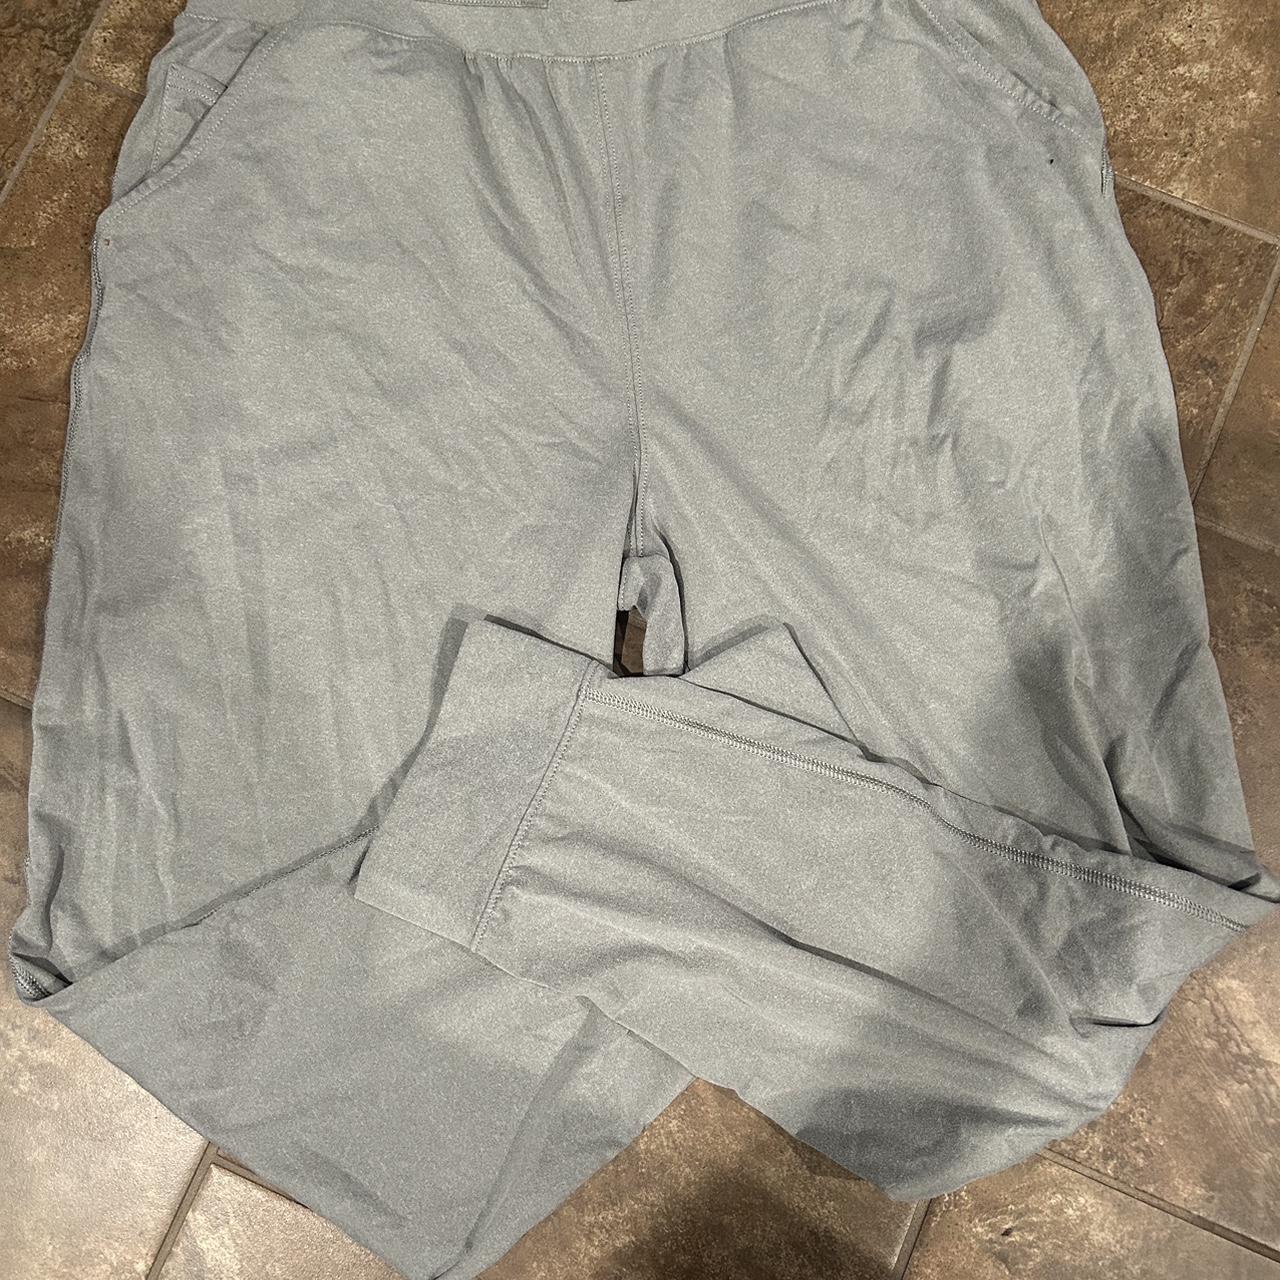 American Eagle: Holiday Snoopy Jogger - Depop